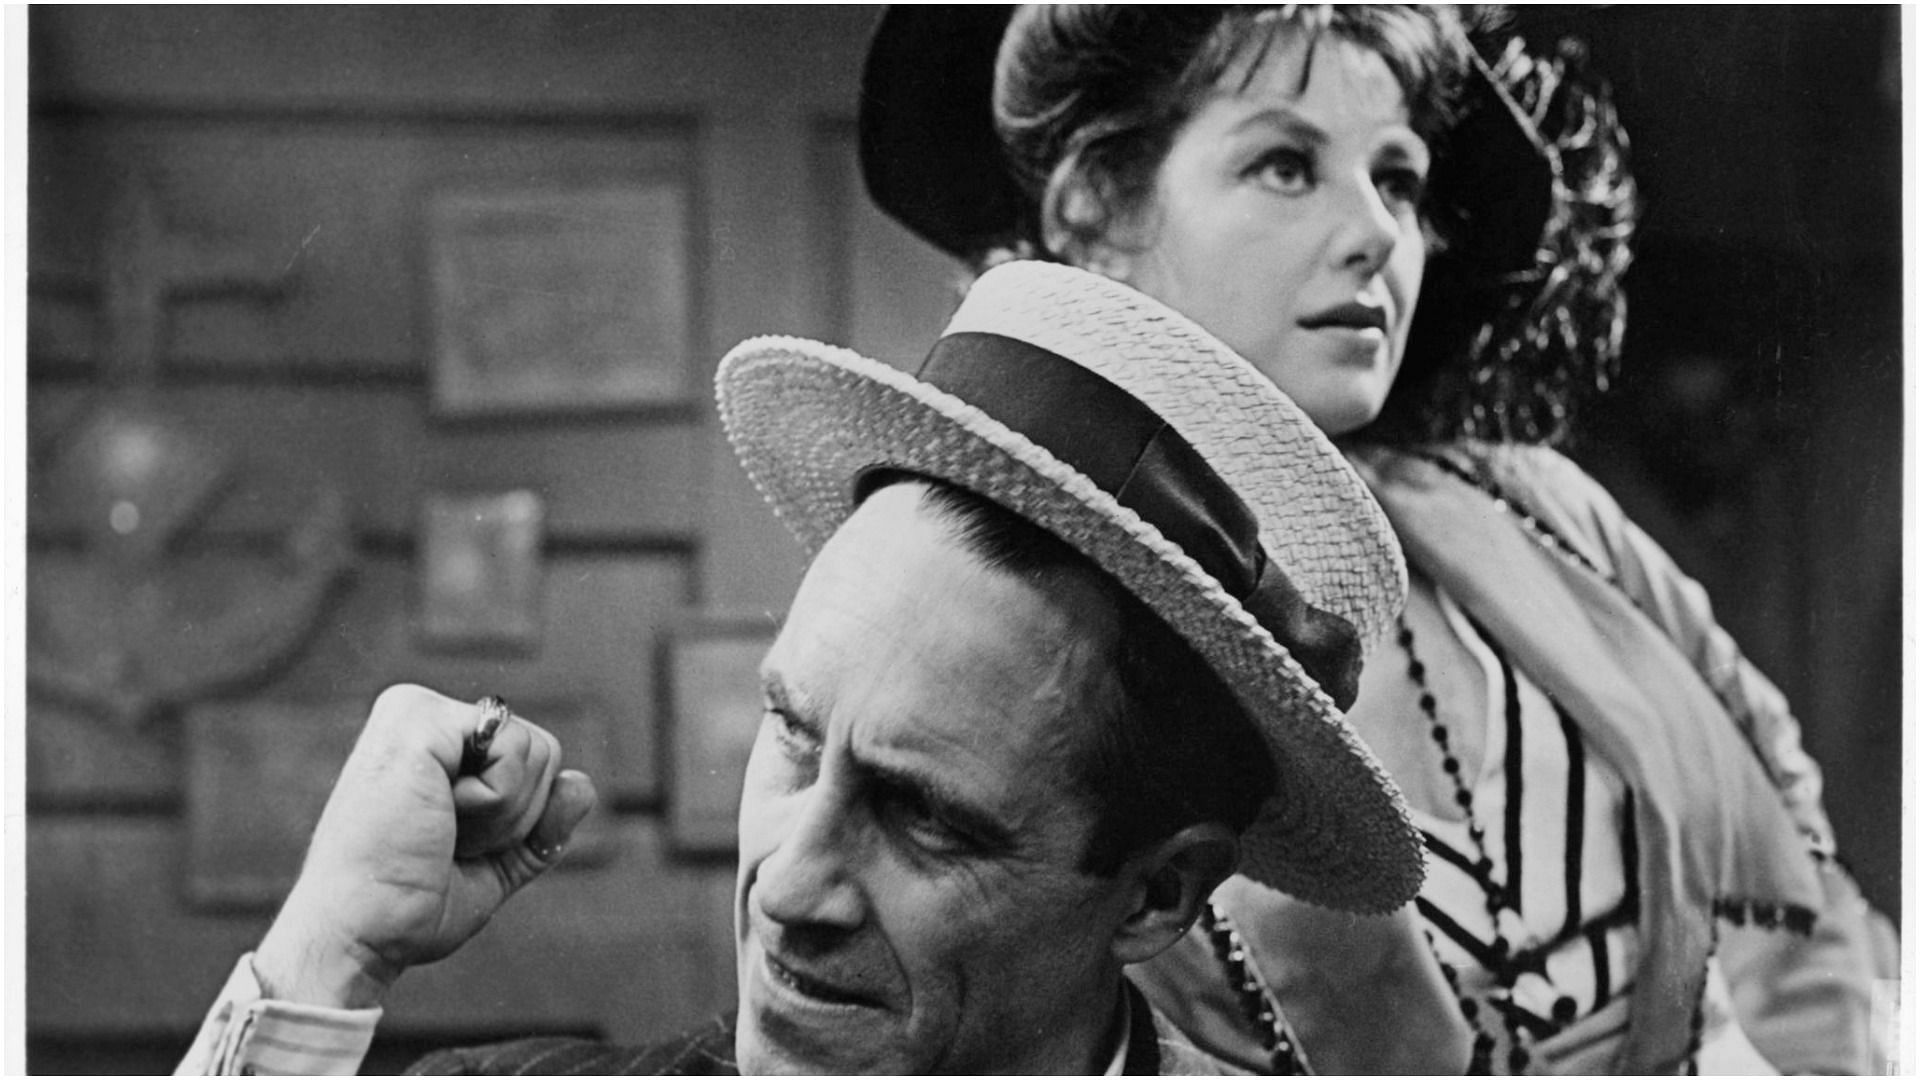 Jason Robards pumps fist as Joan Copeland looks the other way in a scene from the film &#039;The Iceman Cometh,&#039; in 1973 (Image by 20th Century Fox/Getty Images)